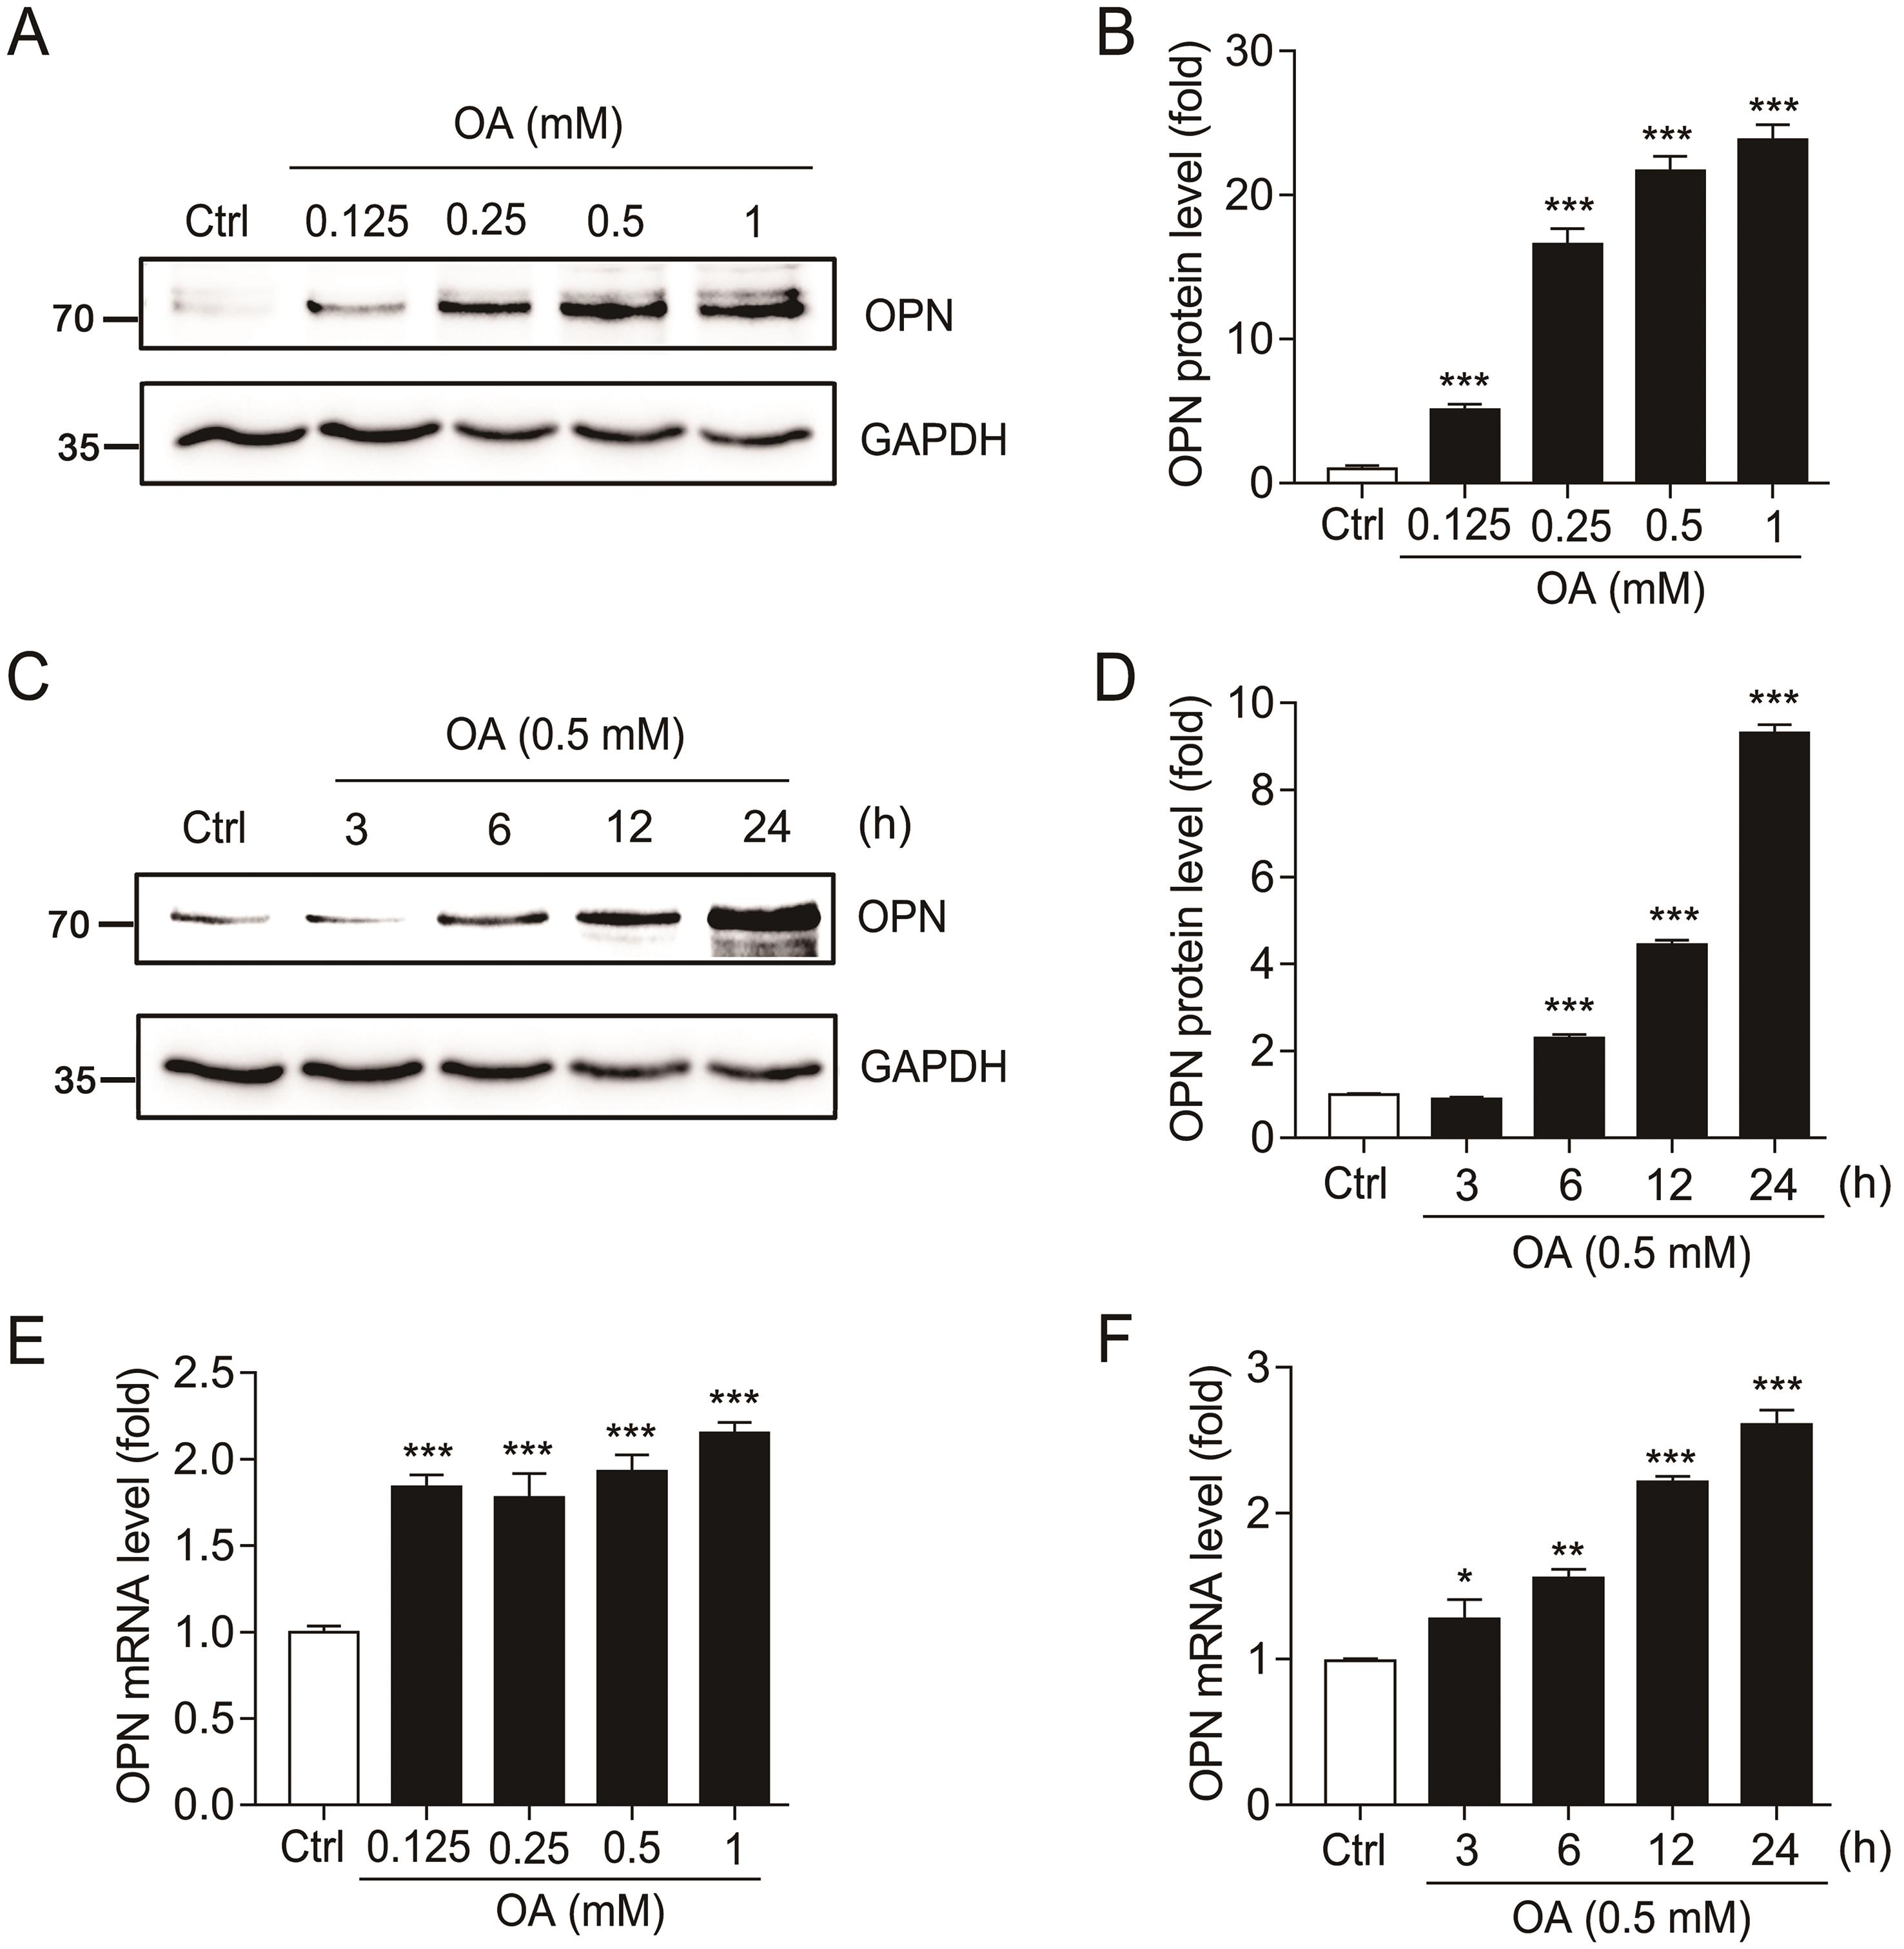 OPN level in HepG2 cells was increased by OA.